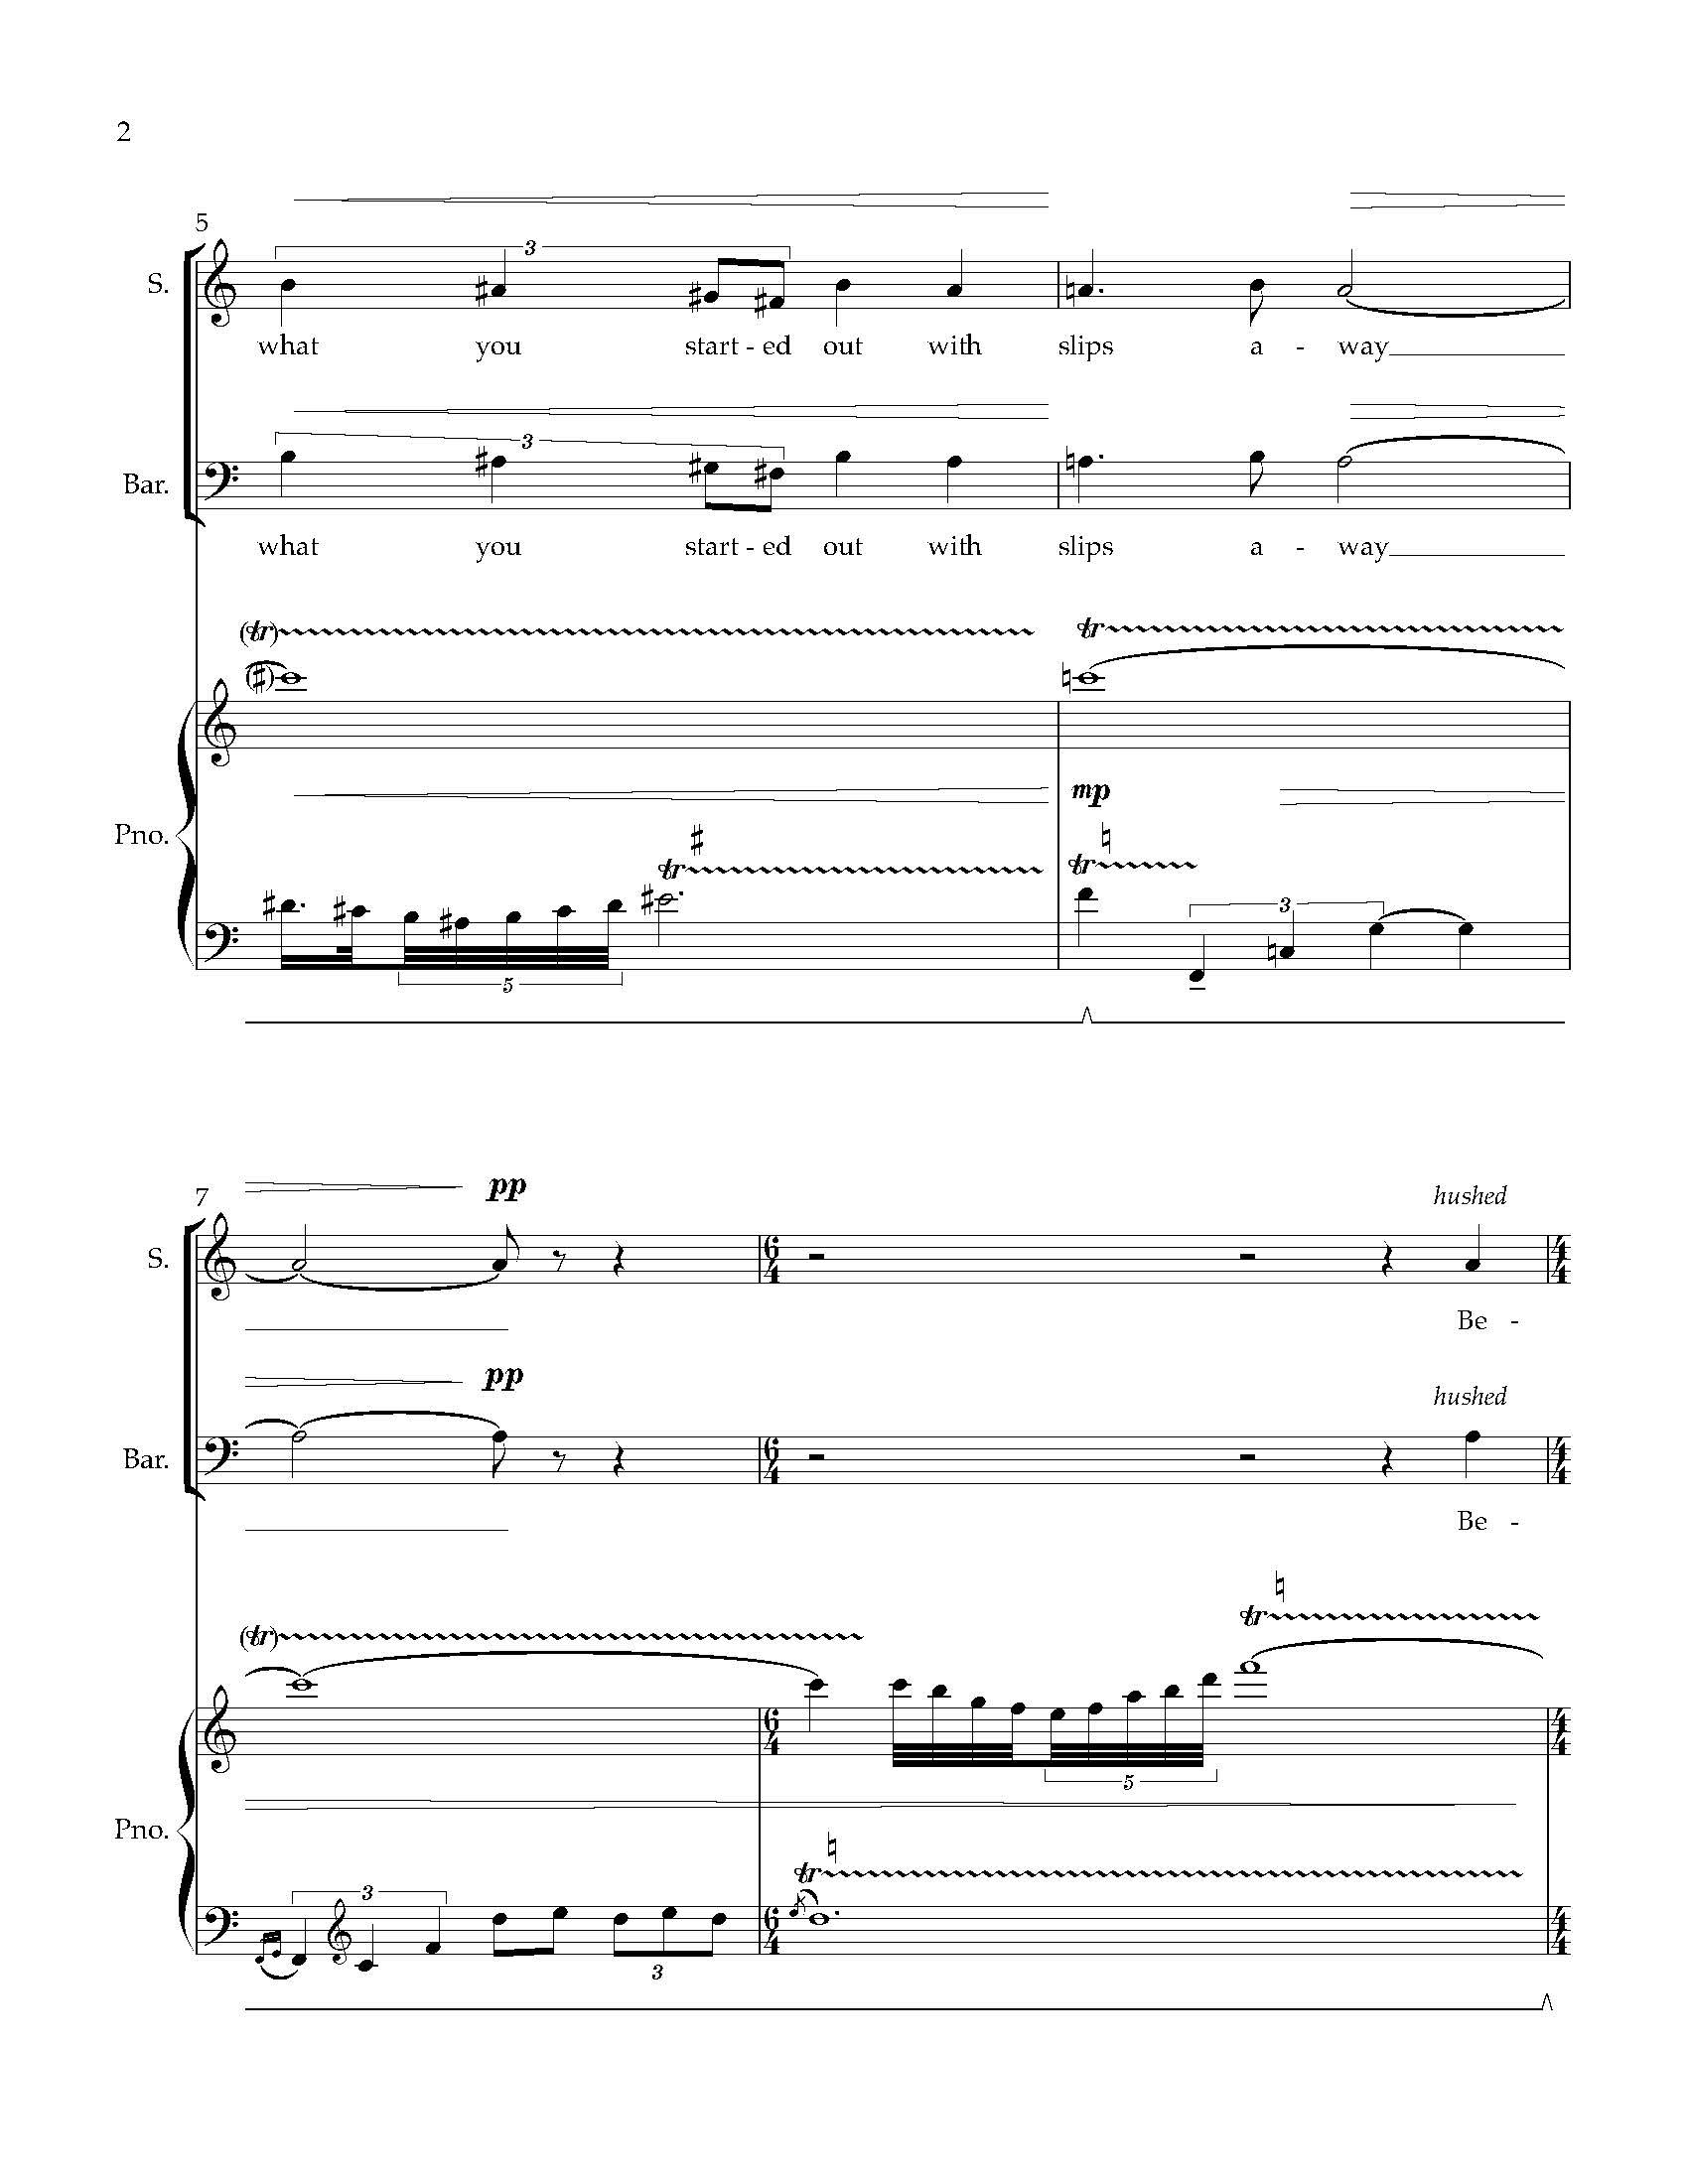 Sky - Complete Score (Revised)_Page_08.jpg